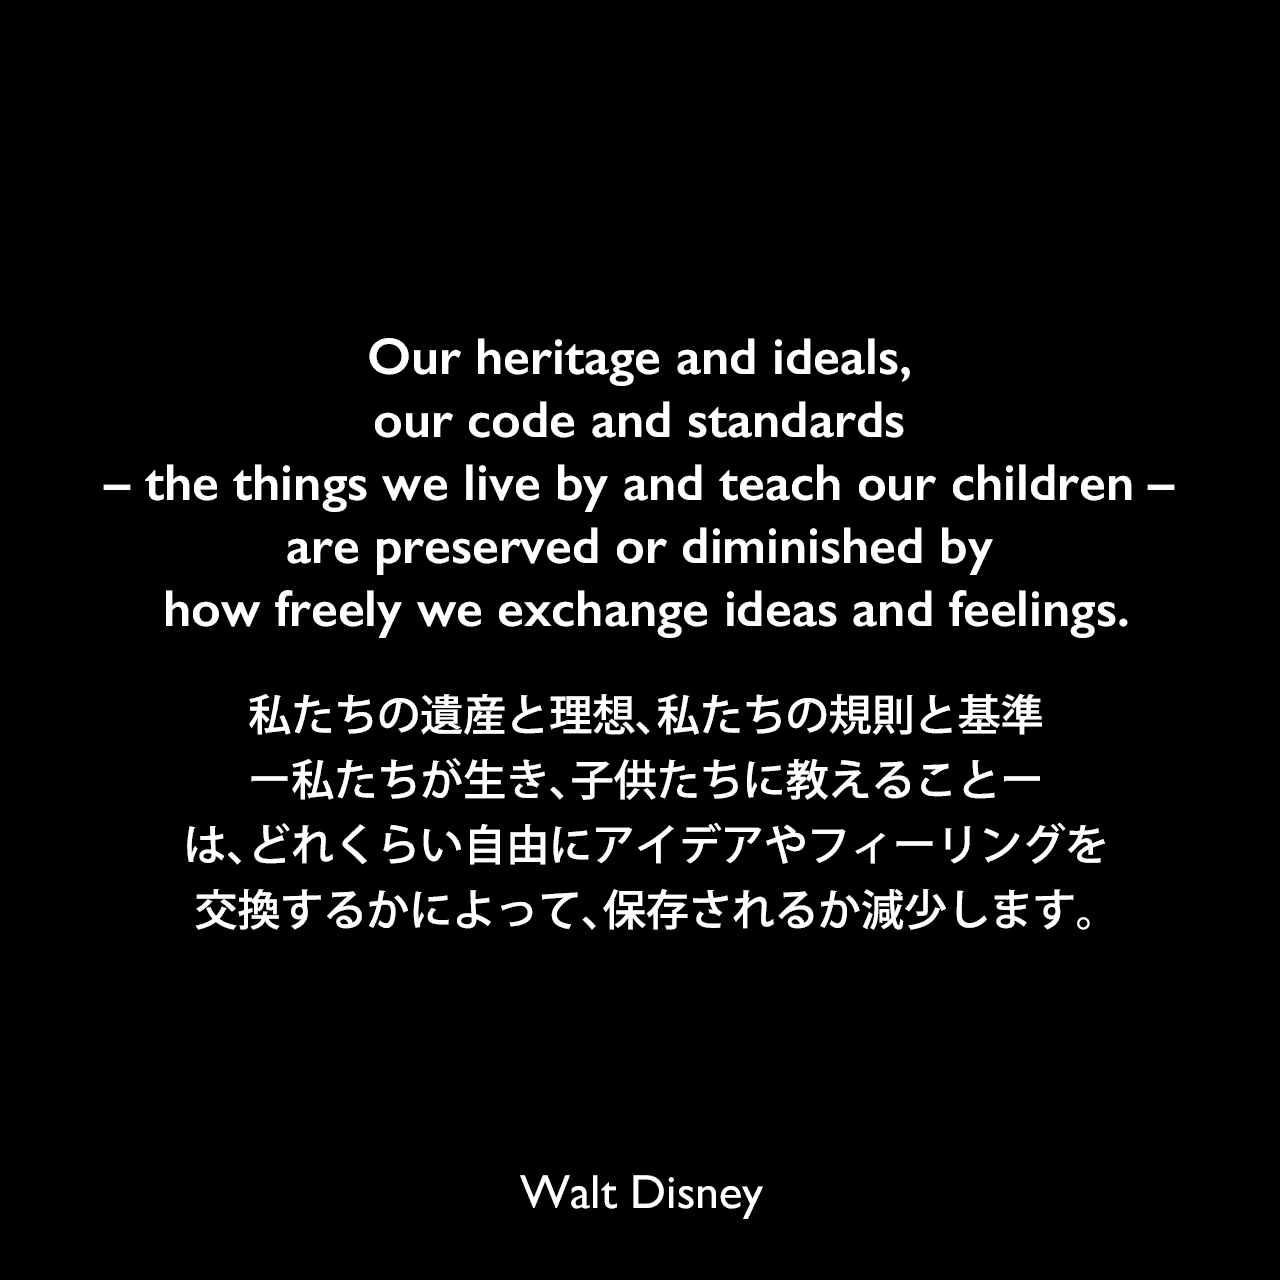 Our heritage and ideals, our code and standards – the things we live by and teach our children – are preserved or diminished by how freely we exchange ideas and feelings.私たちの遺産と理想、私たちの規則と基準ー私たちが生き、子供たちに教えることーは、どれくらい自由にアイデアやフィーリングを交換するかによって、保存されるか減少します。Walt Disney